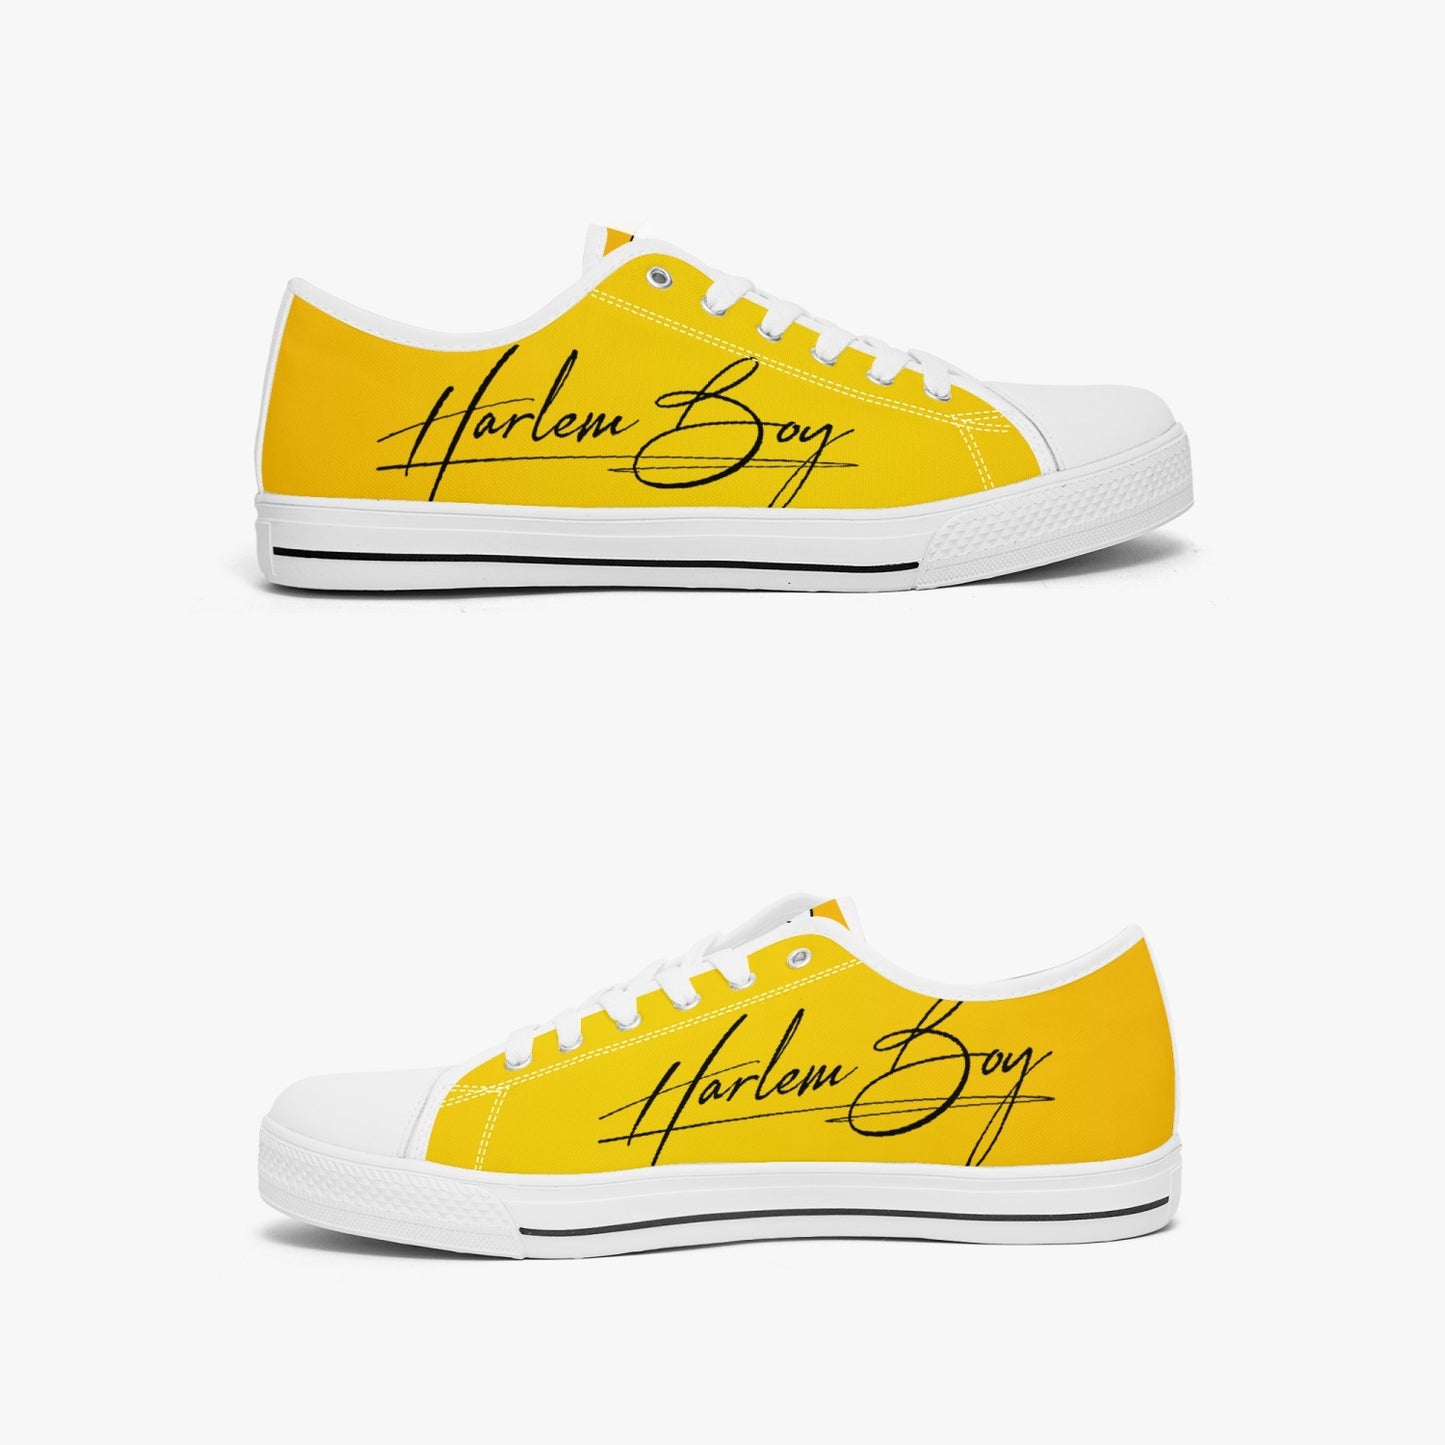 HB Harlem Boy "Lenox Ave" Classic Low Tops - Gold - Men (Black or White Sole)